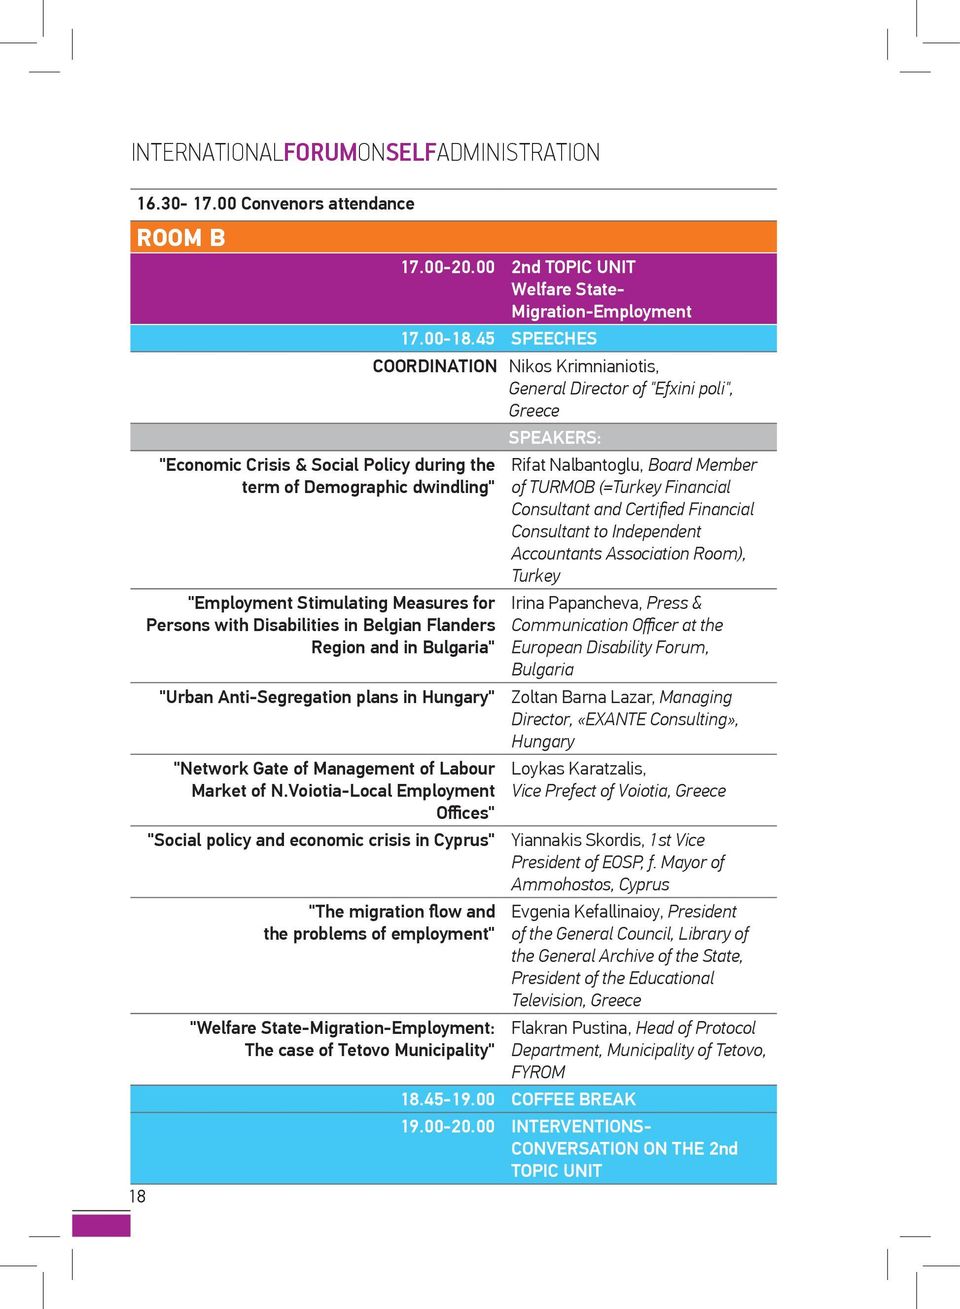 and in Bulgaria" "Urban Anti-Segregation plans in Hungary" "Network Gate of Management of Labour Market of N.Voiotia-Local Employment Offices" "Social policy and economic crisis in Cyprus" 17.00-20.